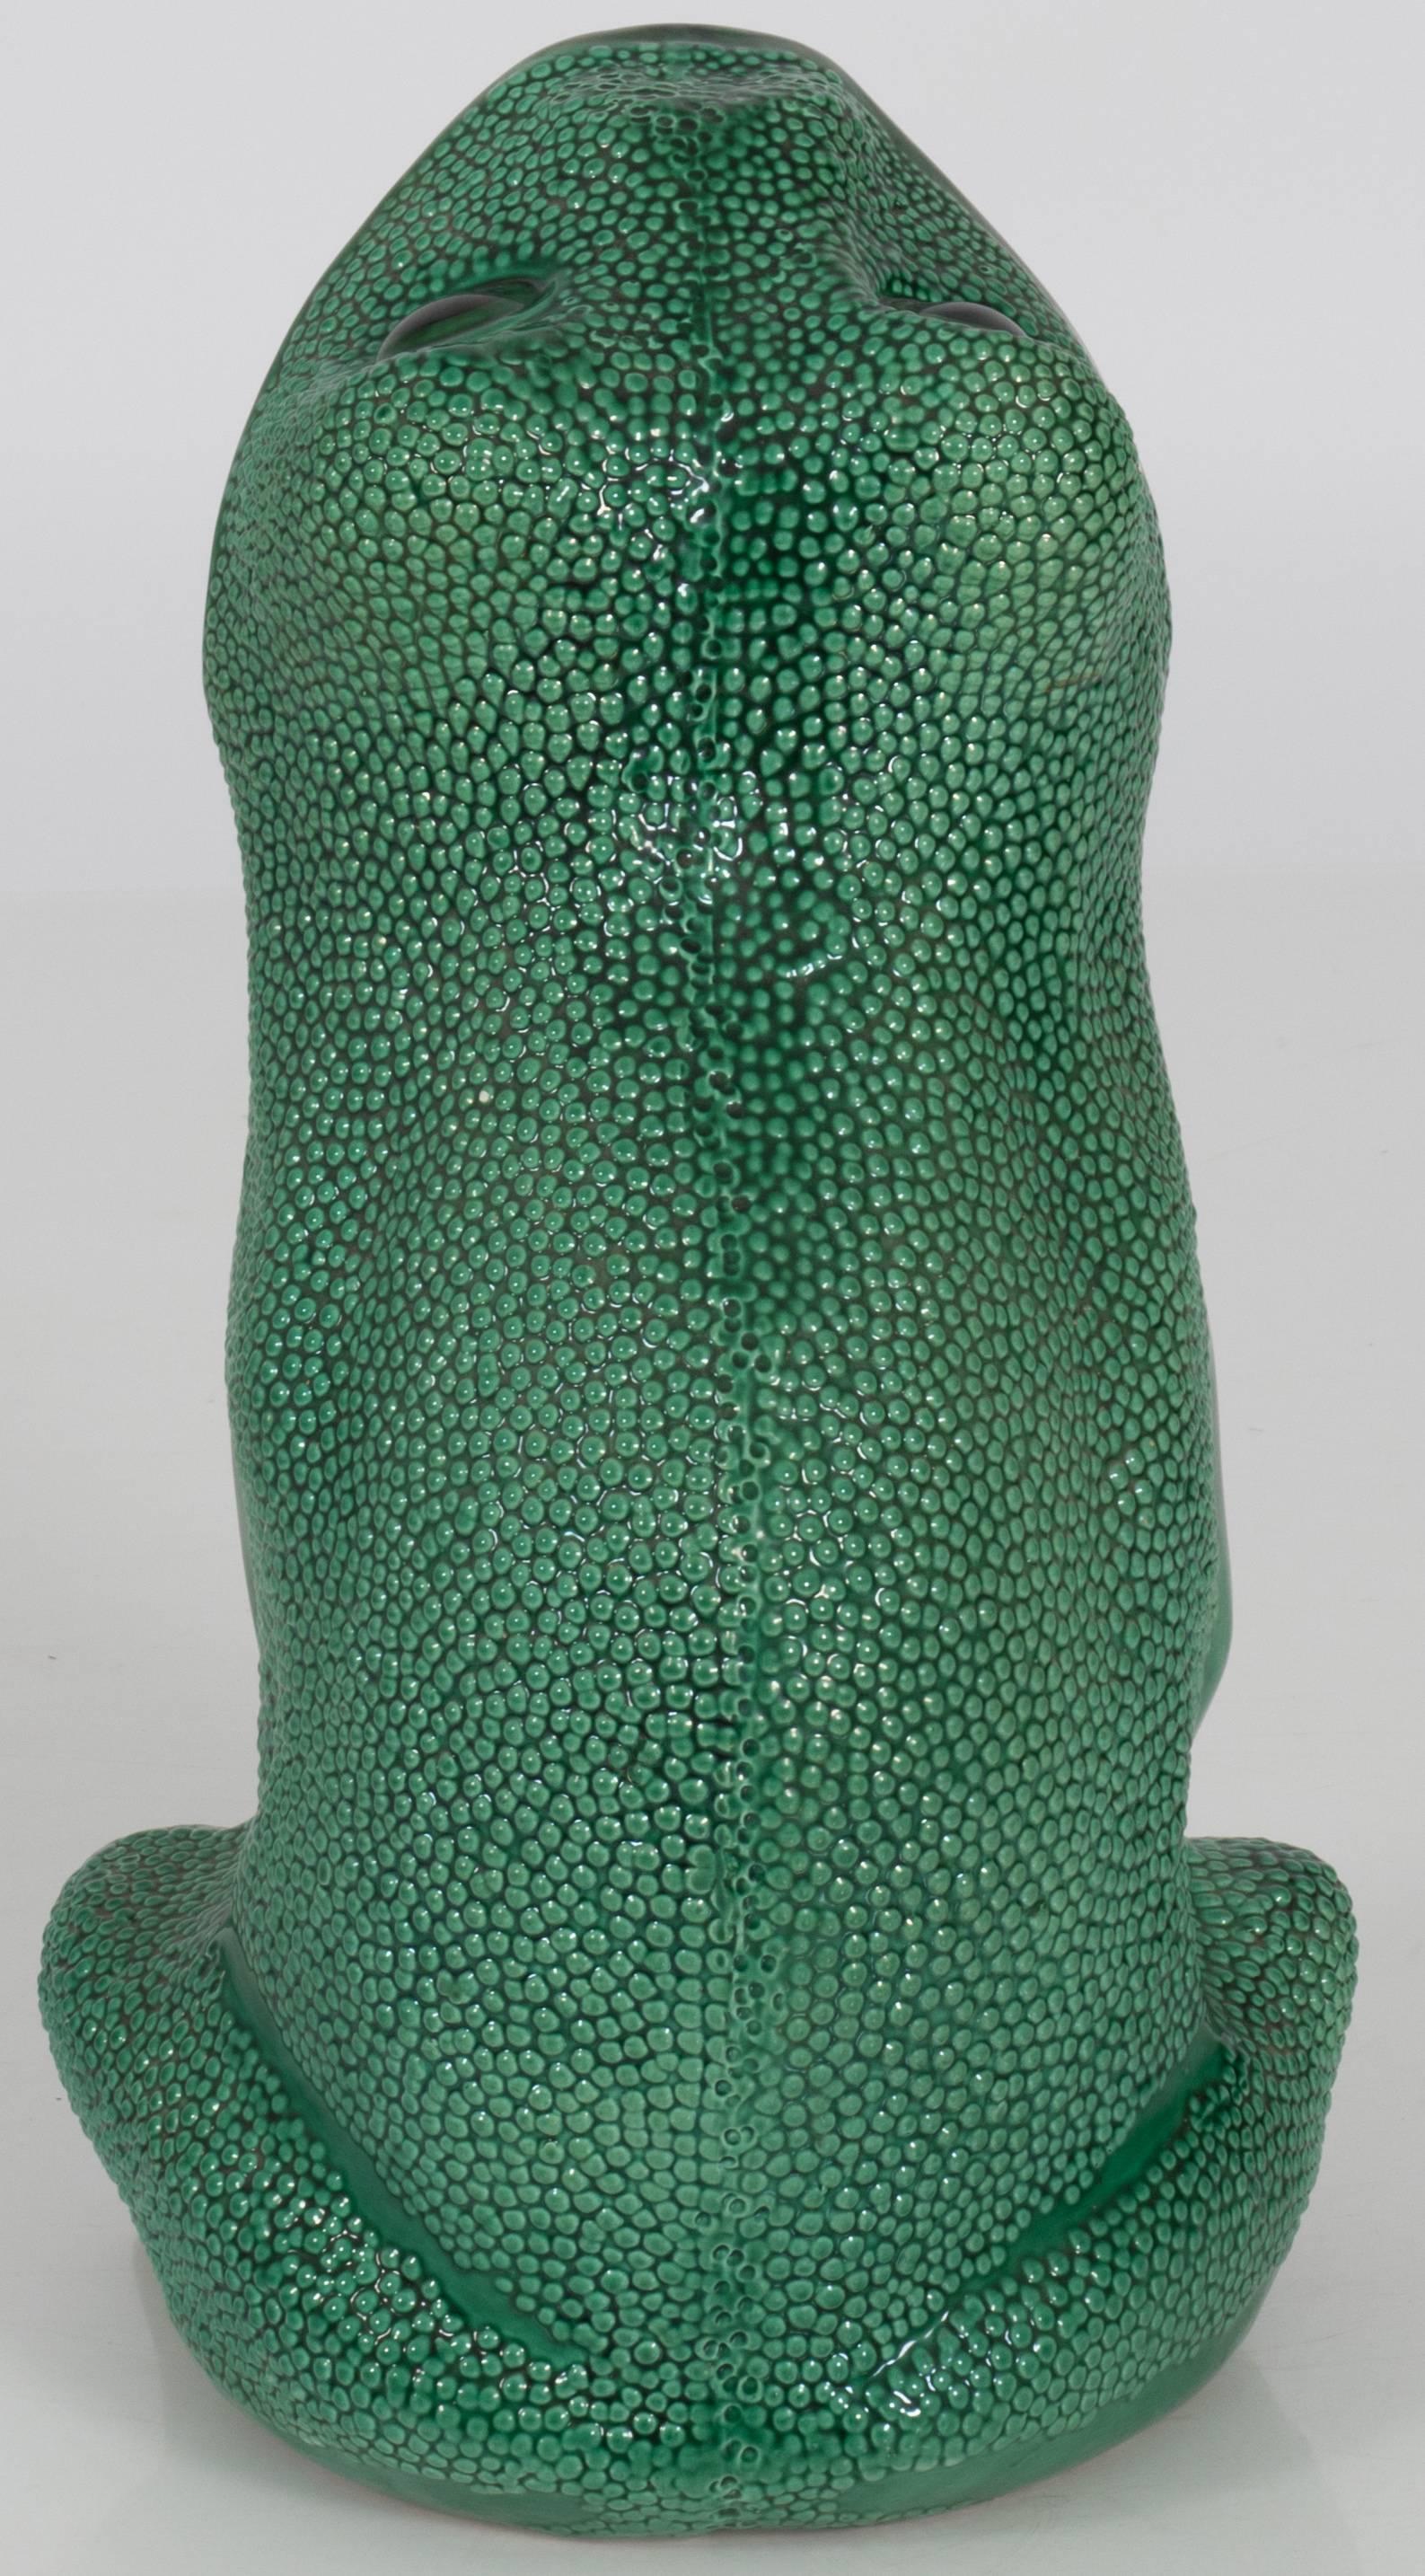 Mid-20th Century Italian Green Frog Umbrella Stand by Gumps